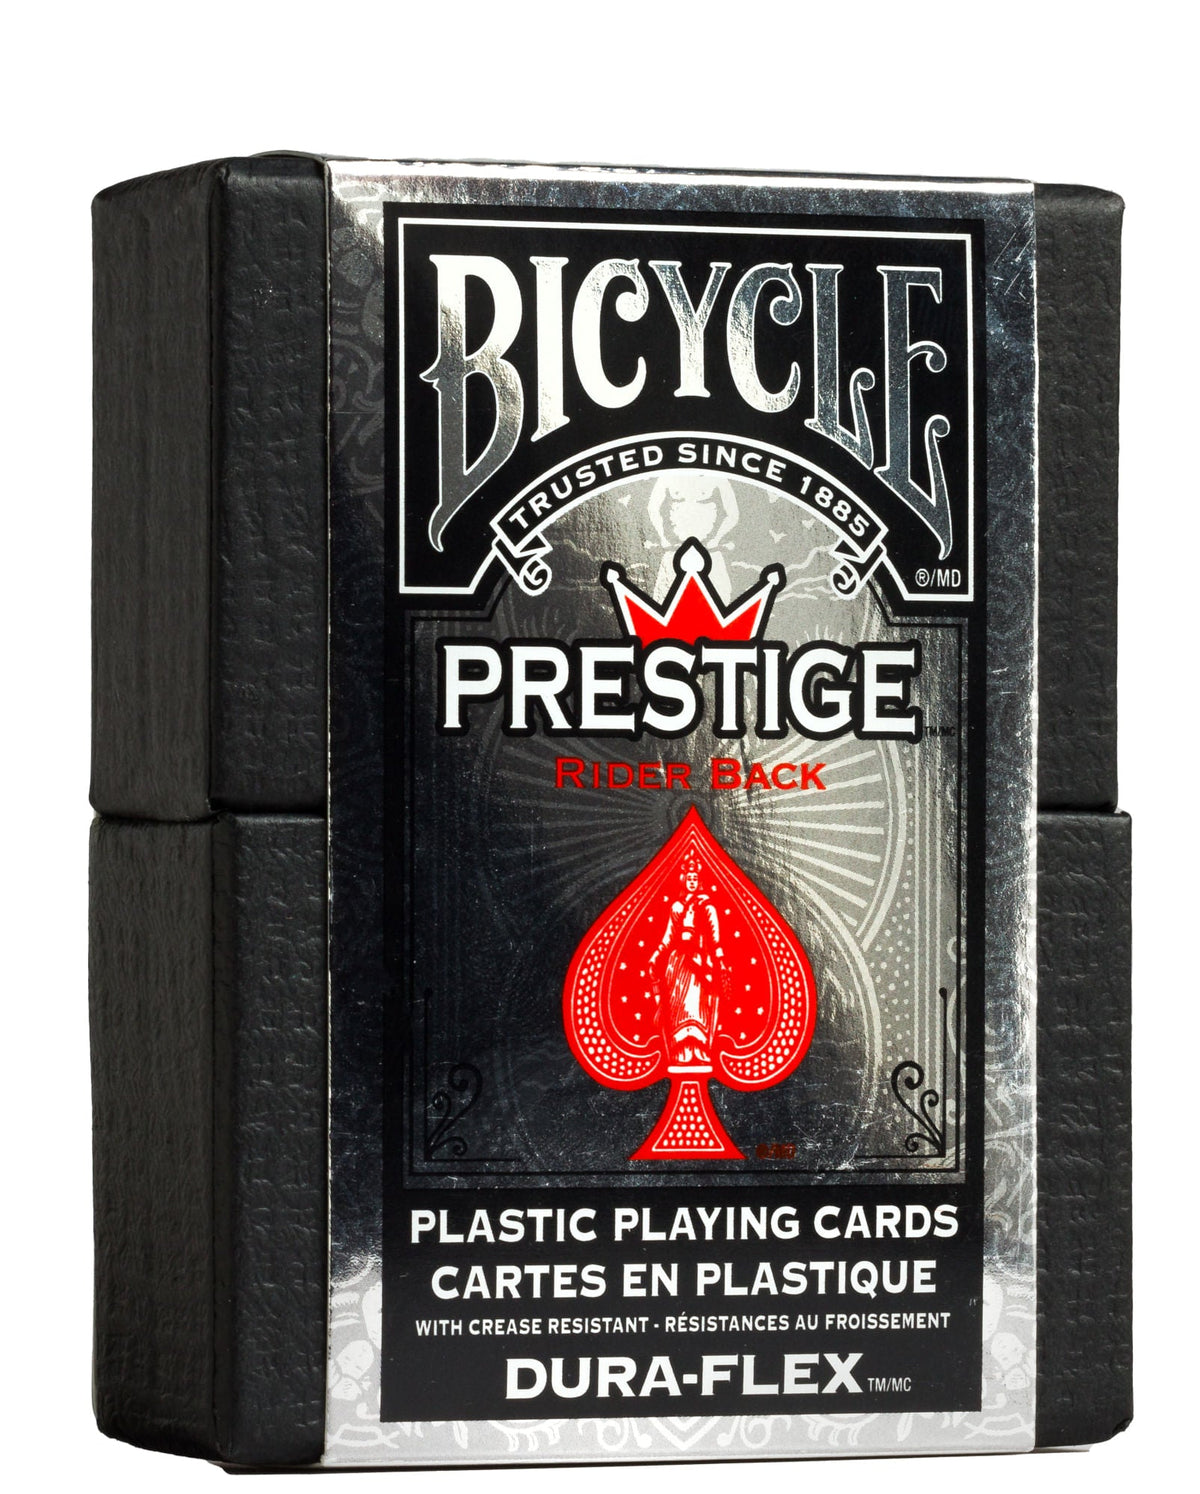 Buy Bicycle Prestige Rider Back UV Marked Cards | Poker Cheating Devices